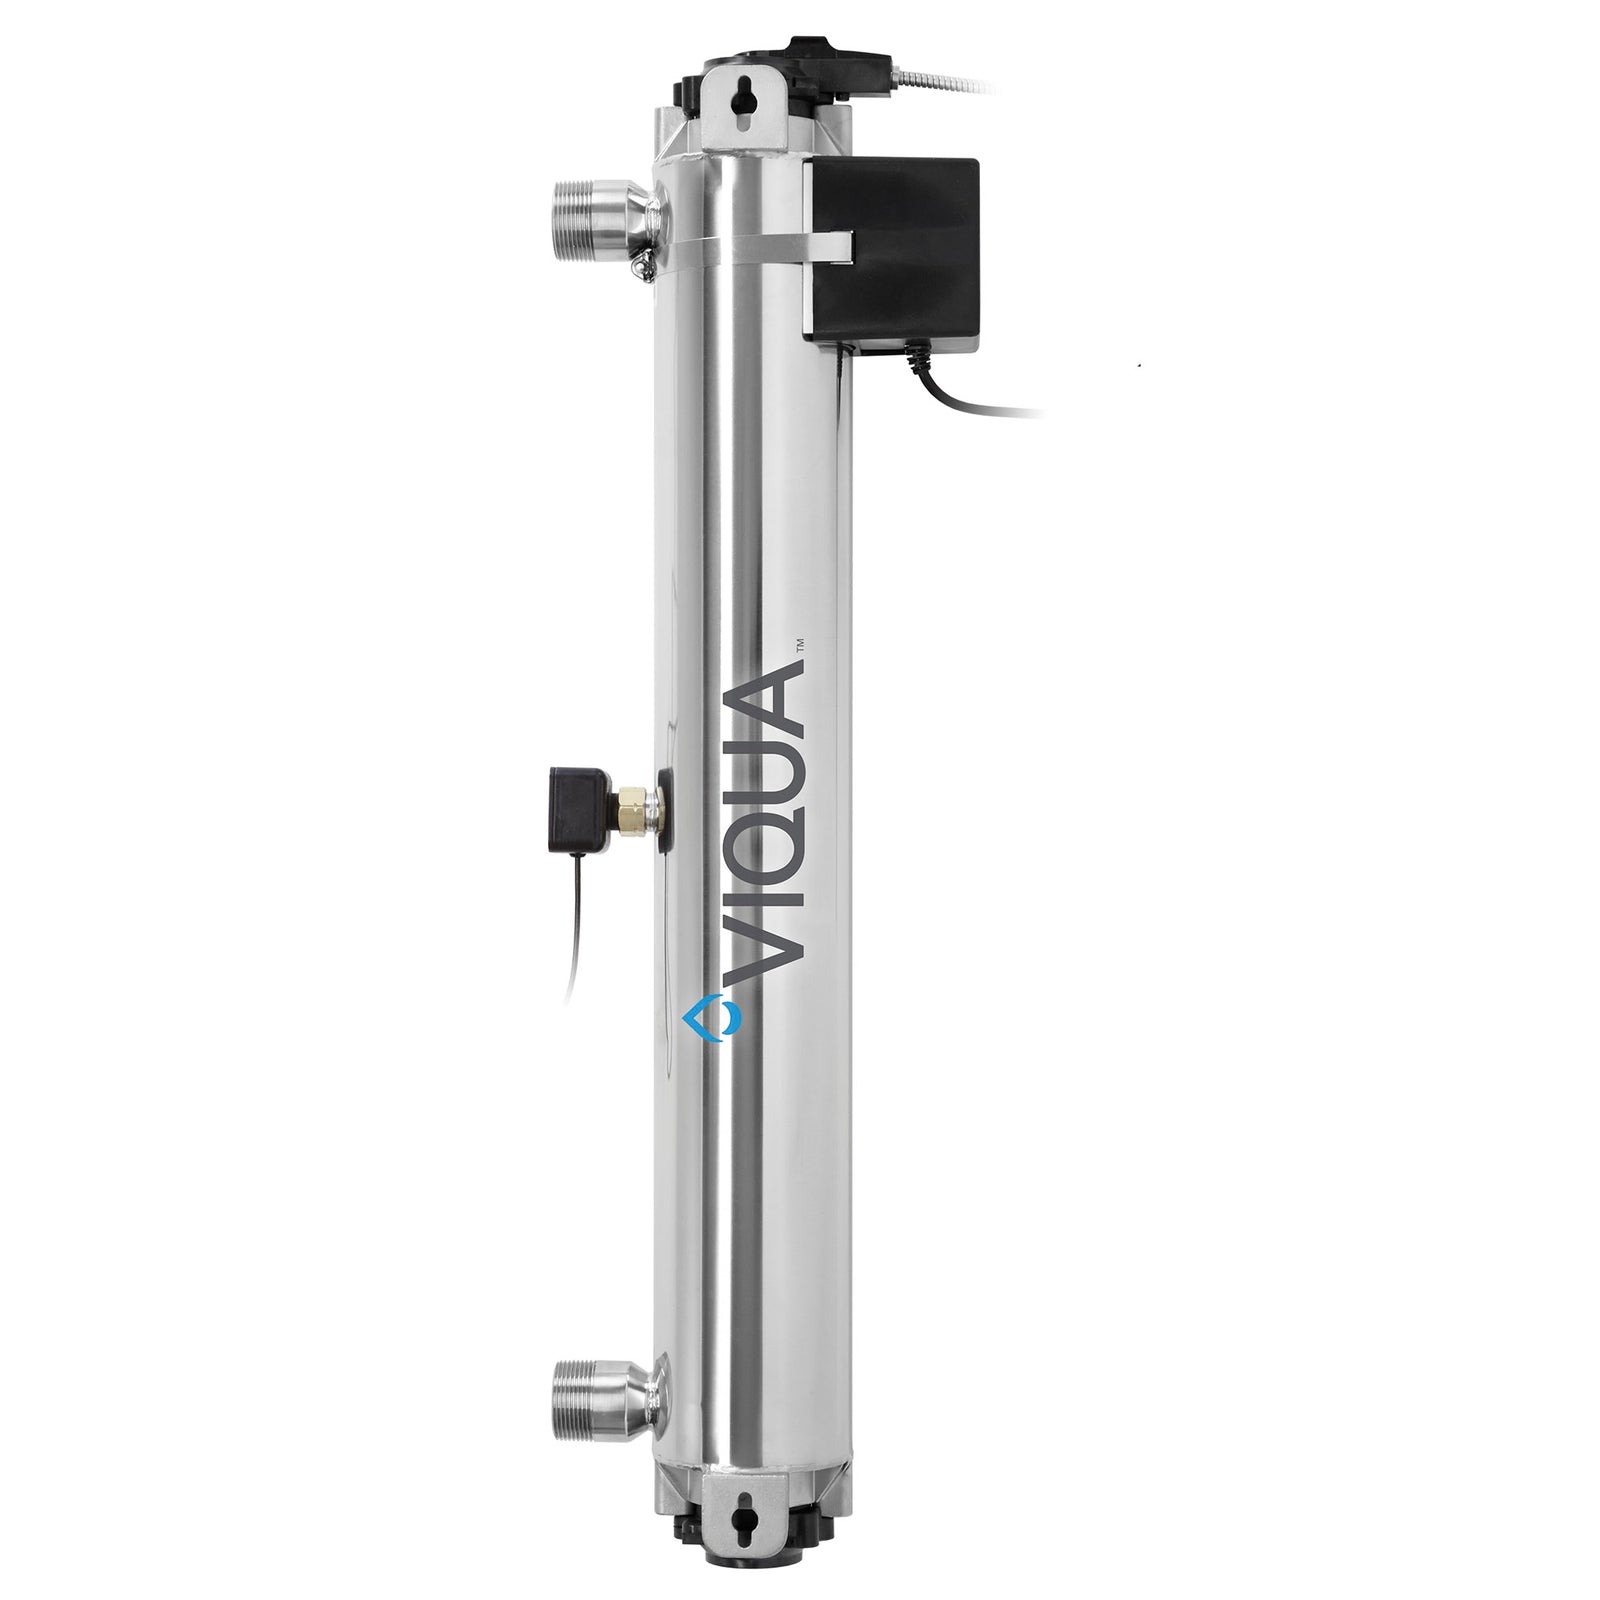 650652 H+ UltraViolet Water Disinfection System by Viqua